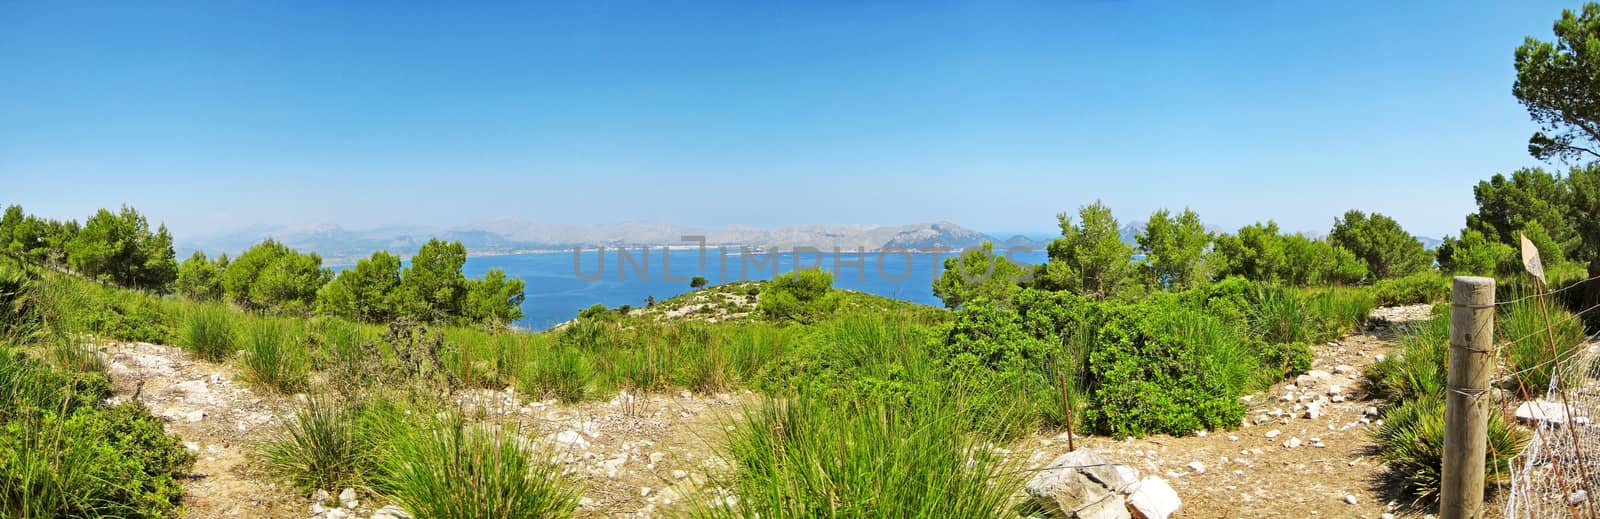 Bay of Pollenca, peninsula Formentor, view from peninsula Victoria - coastal cliff coast with ocean view panorama